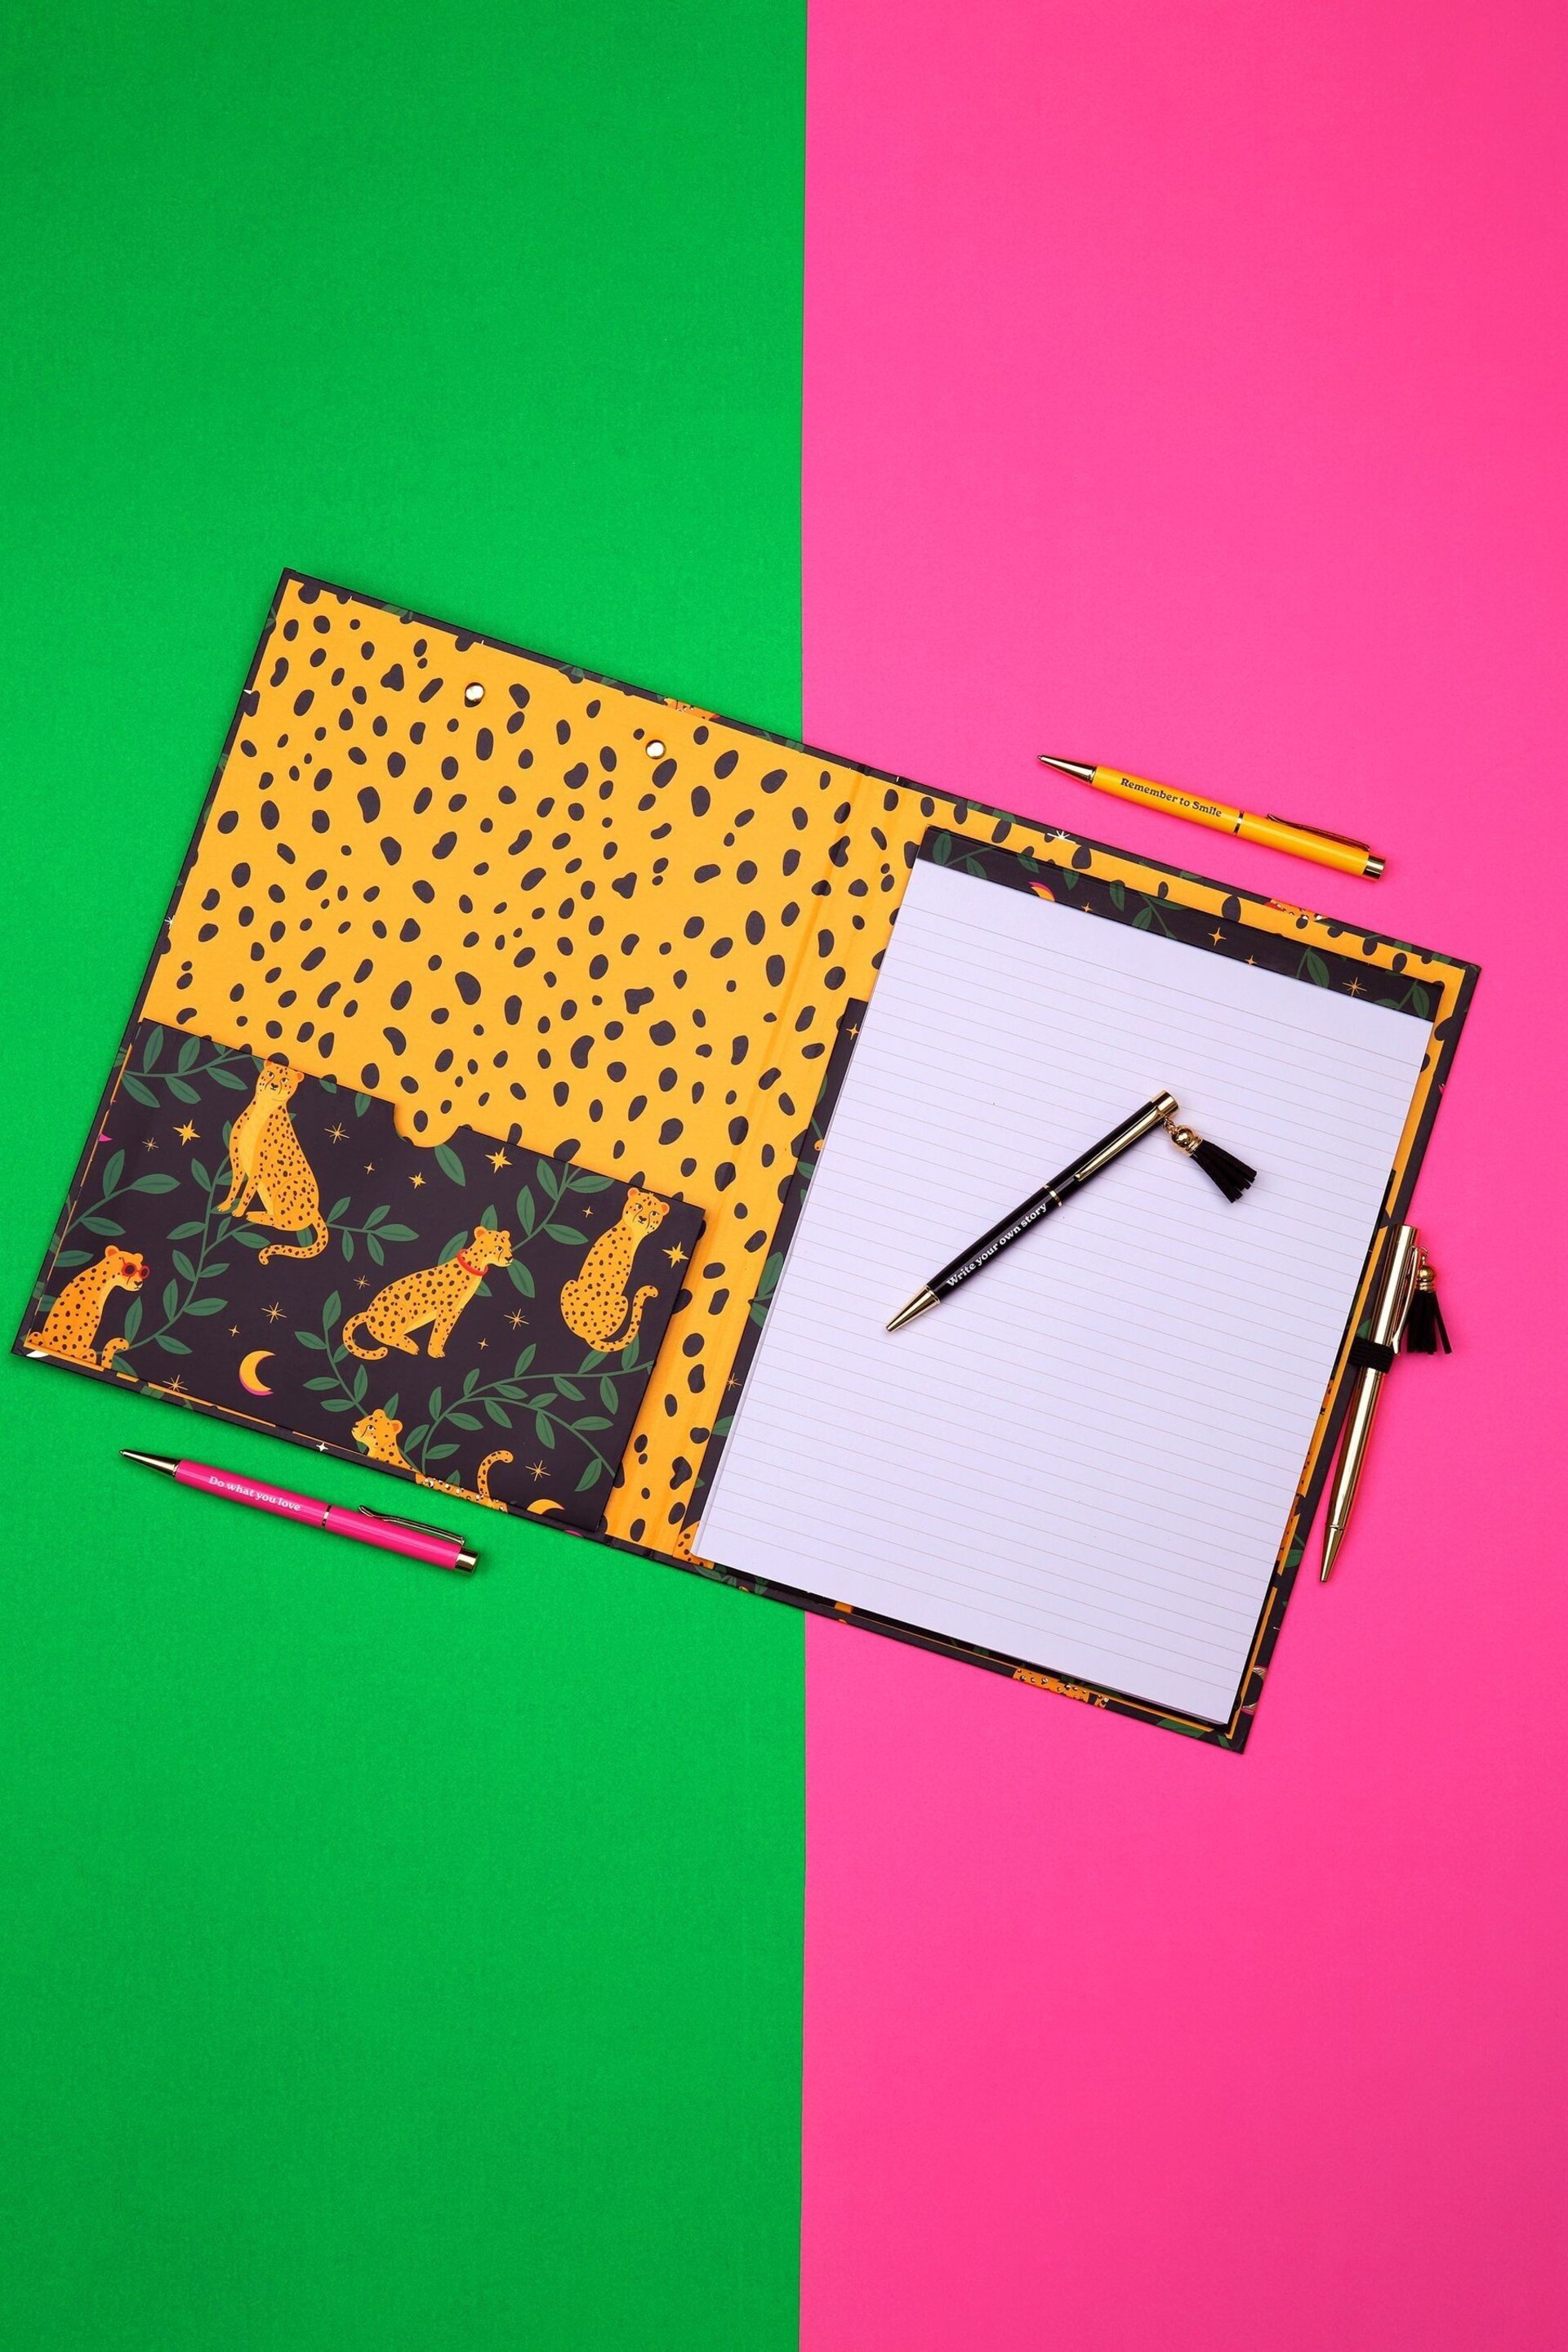 Tache A4 Padfolio With Pen And 3 Pack of Positivity Pens - Image 1 of 1